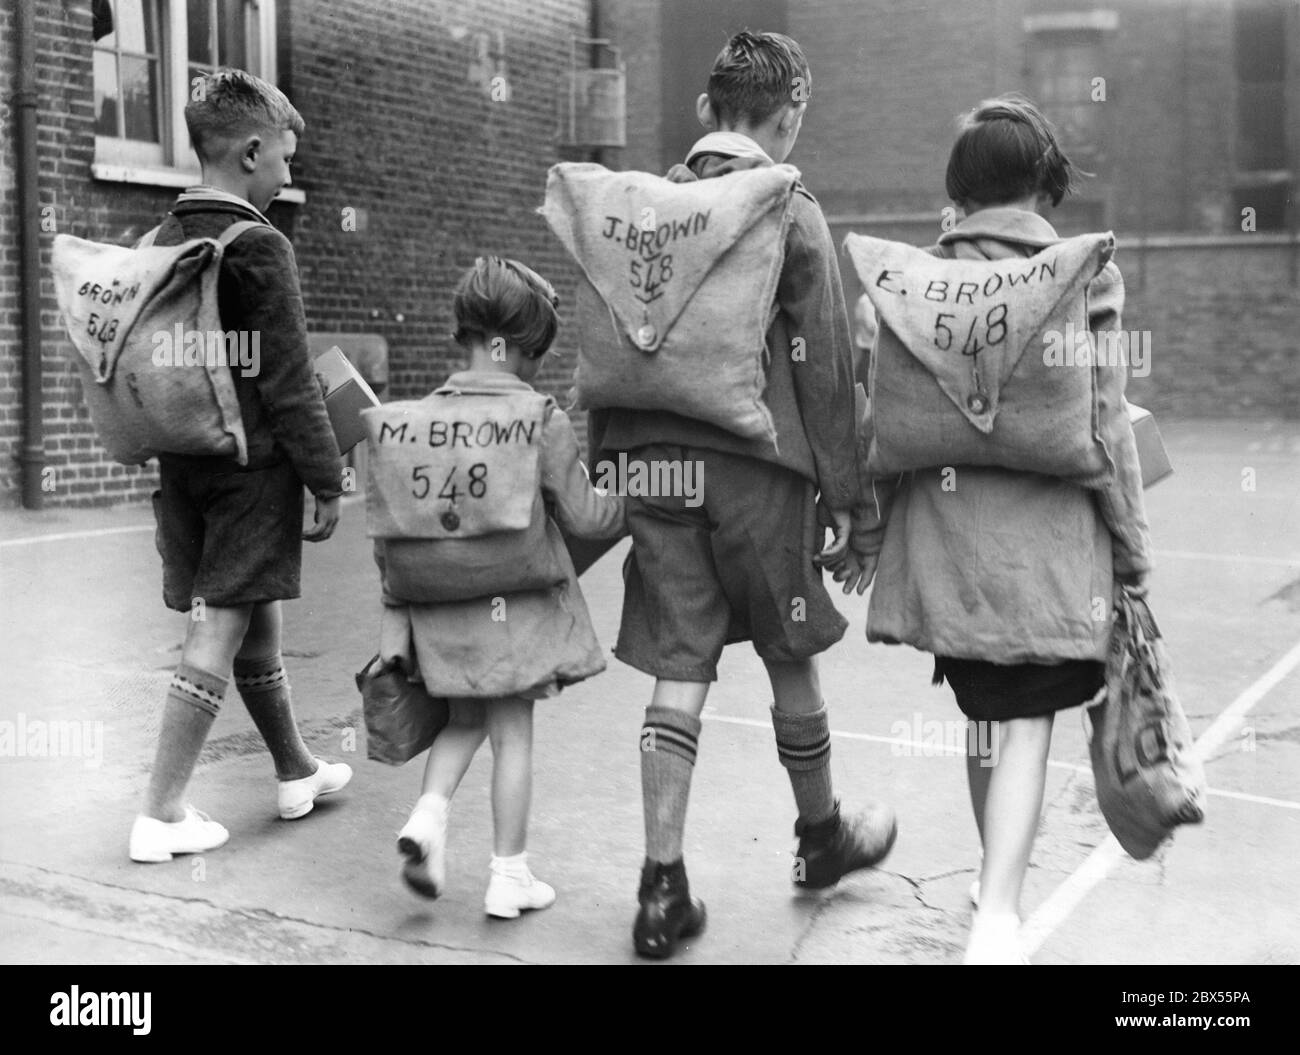 The four children of the Brown family are on their way to their school in Clerkenwell Green, which has been specially opened for evacuation drills during the holidays. Their names and numbers are written on the children's backpacks. Stock Photo